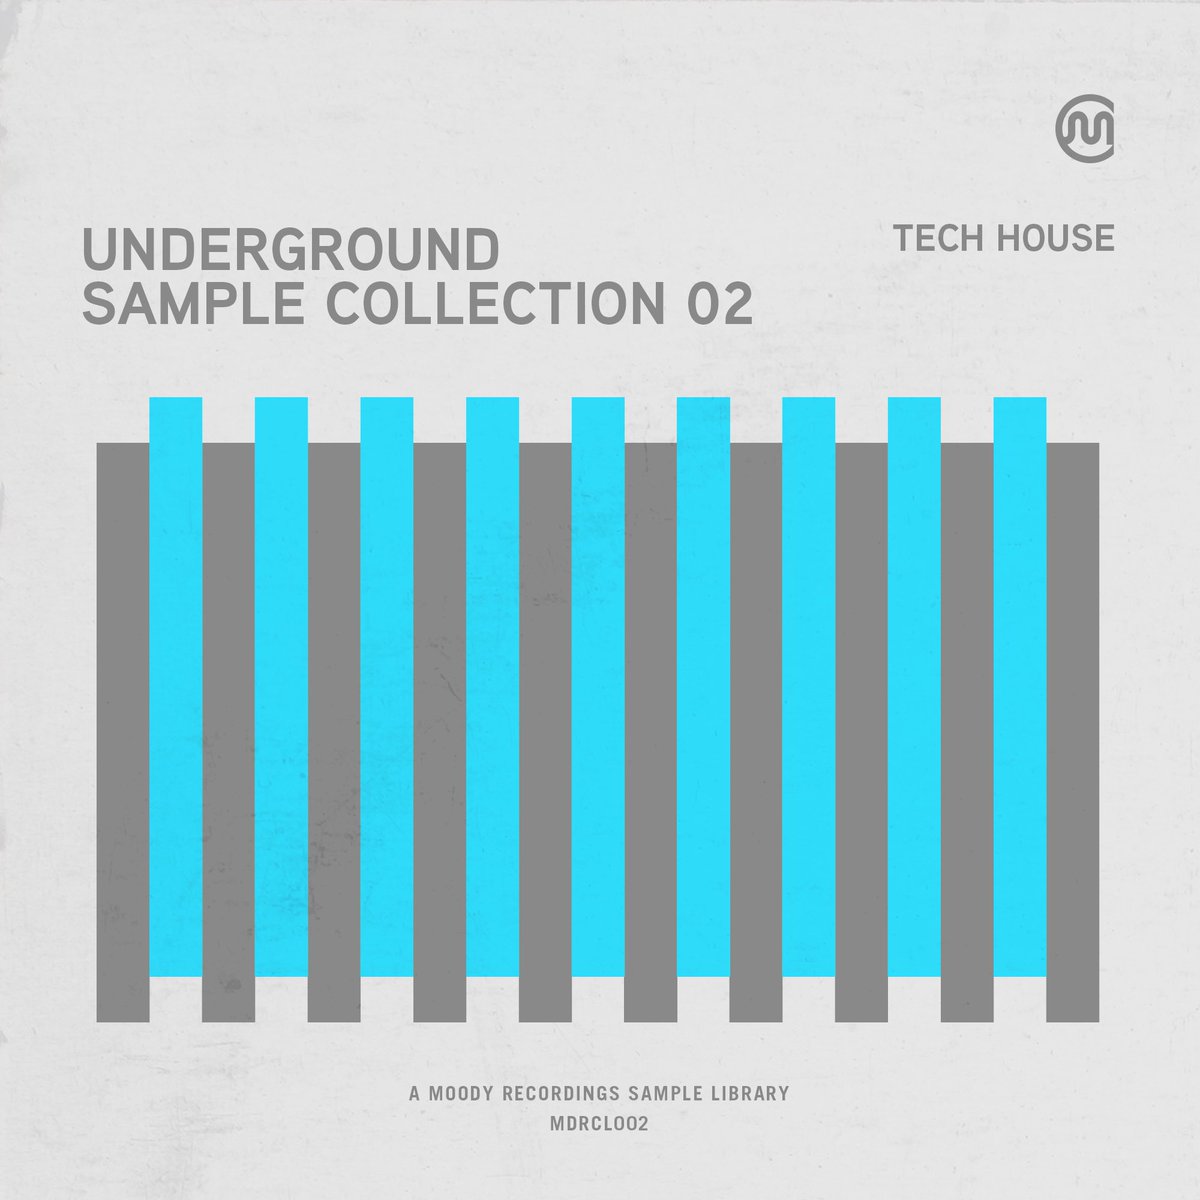 Live on @Loopmasters in the Tech House genre our Underground Sample Collection series! Check it out next time in session: #loopcloud #beatport #samplepack